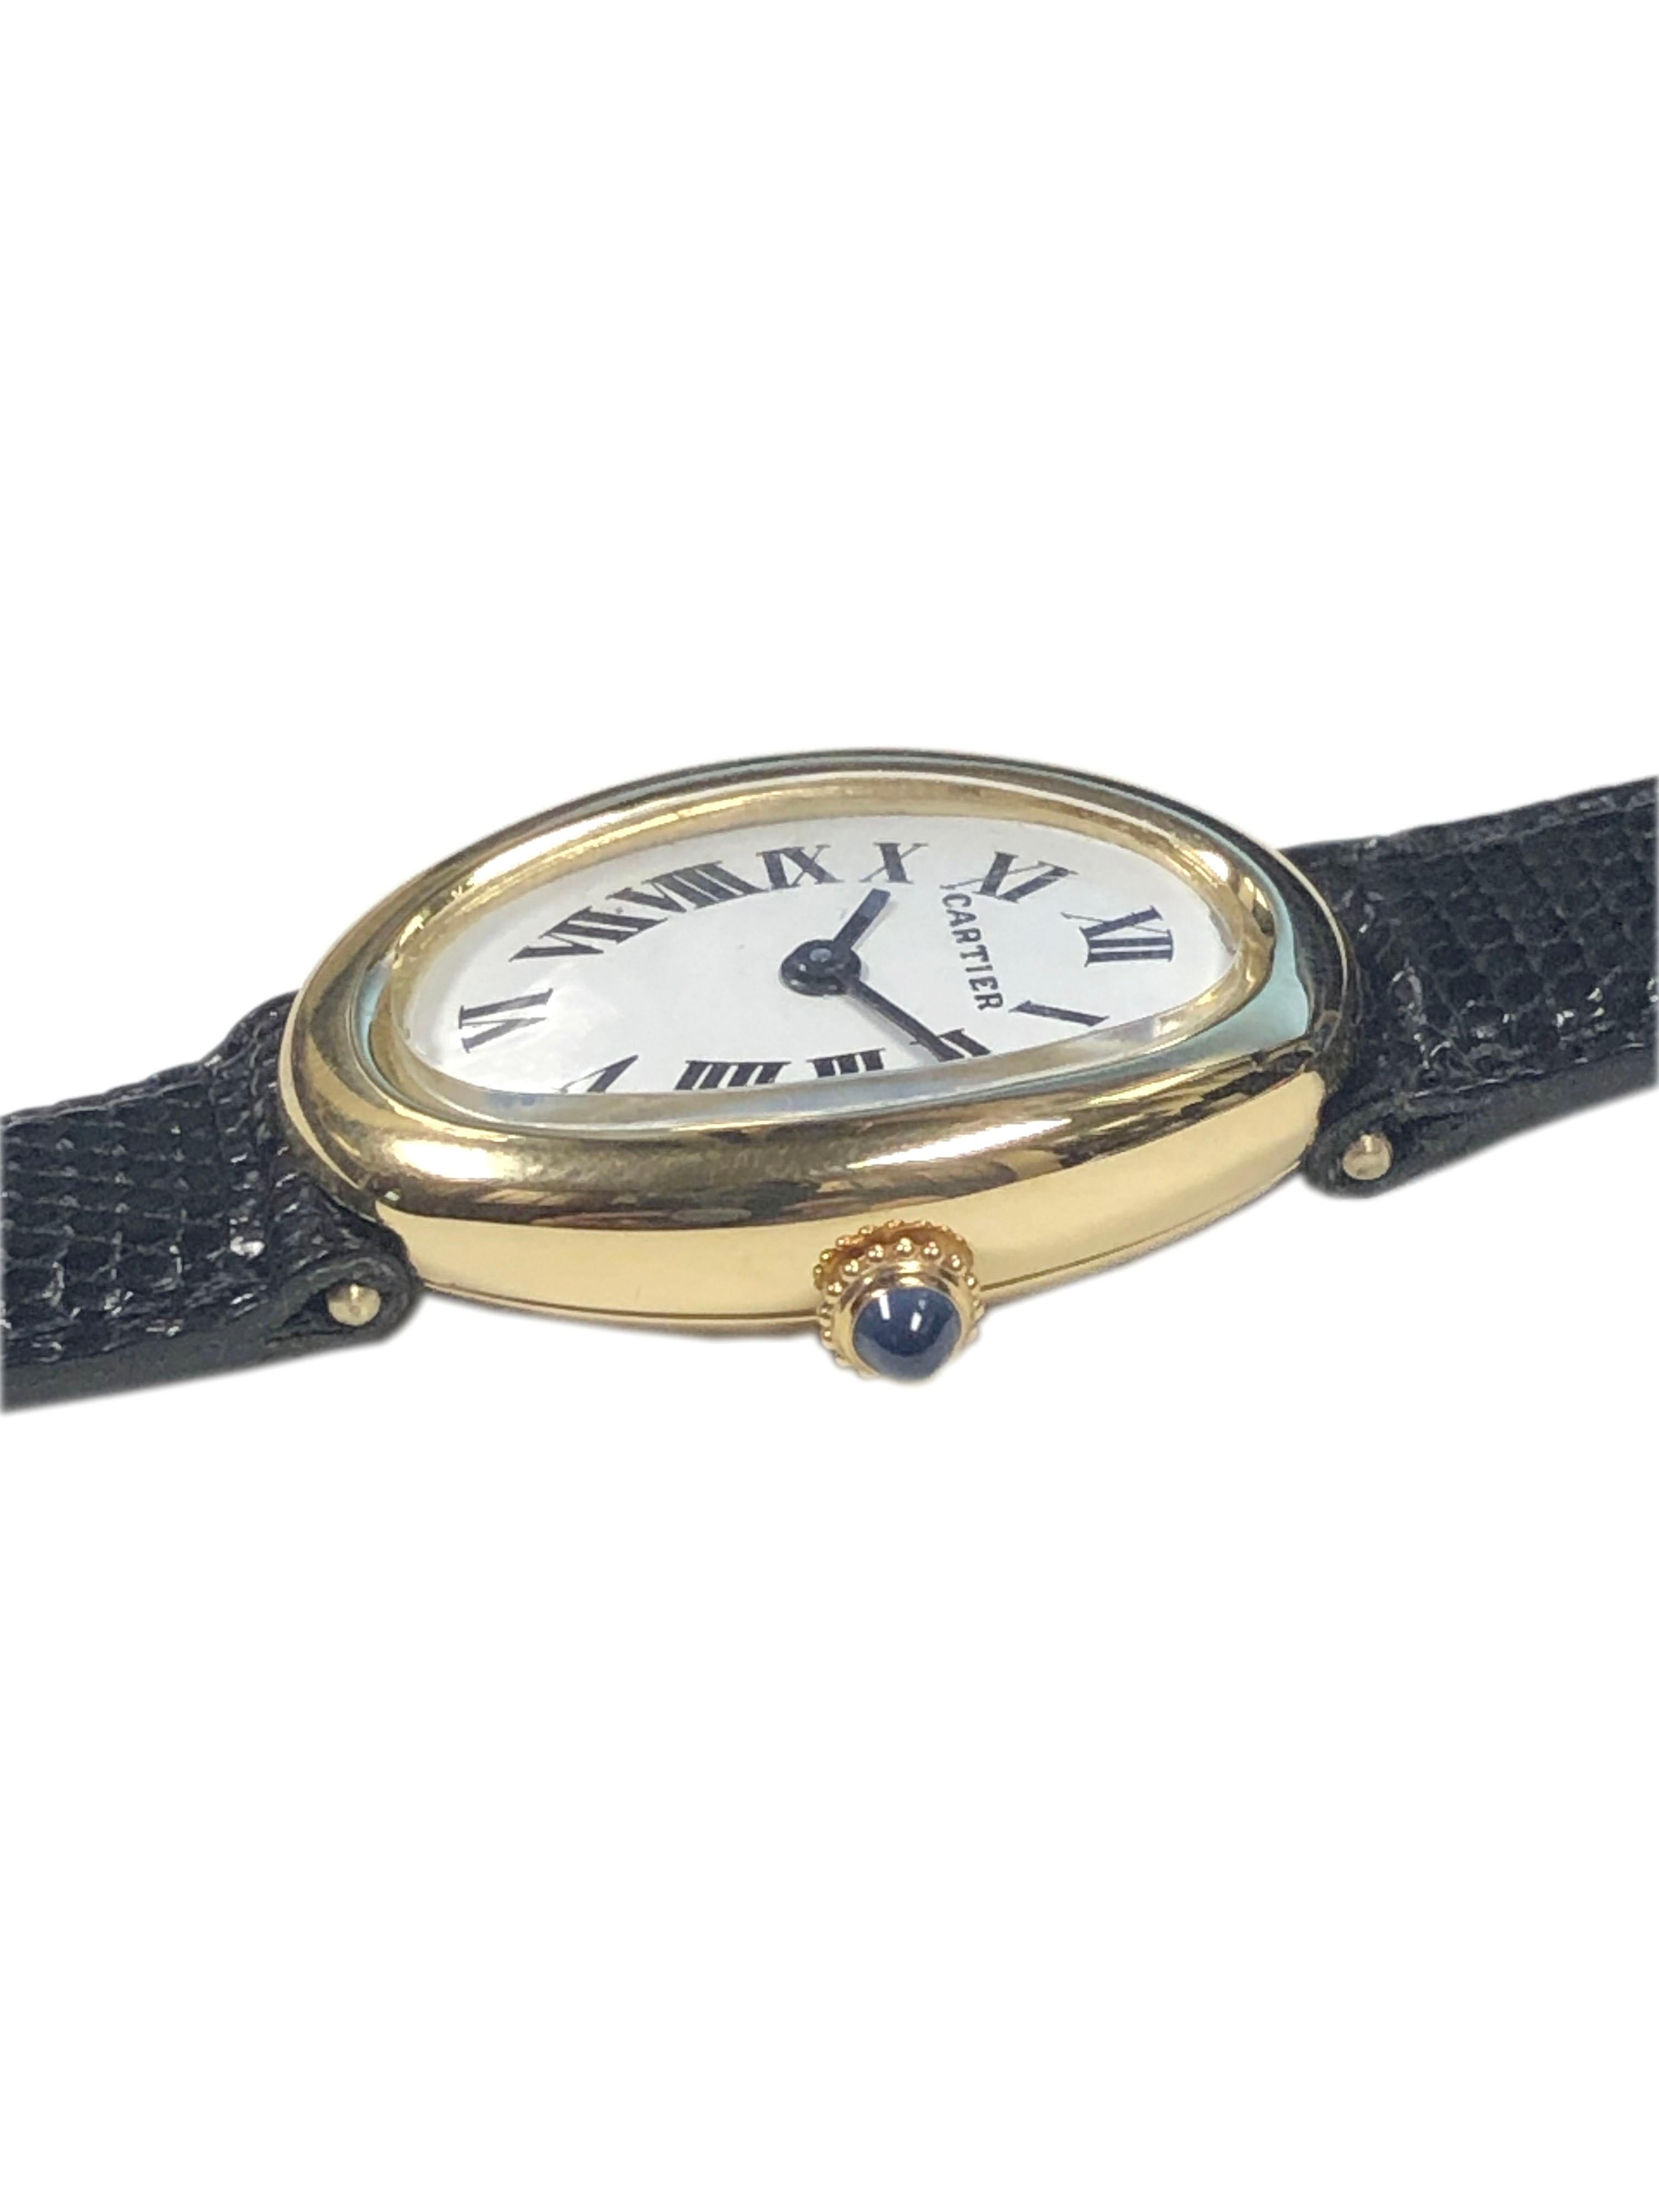 Circa 1970s Cartier Baignoire Ladies Wrist Watch, 30 X 22 M.M. 18K yellow Gold 2 piece case, 17 jewel Mechanical Manual wind movement, White dial with Black Roman numerals and a Sapphire Crown. Original Cartier Black Lizard strap with Cartier Gold